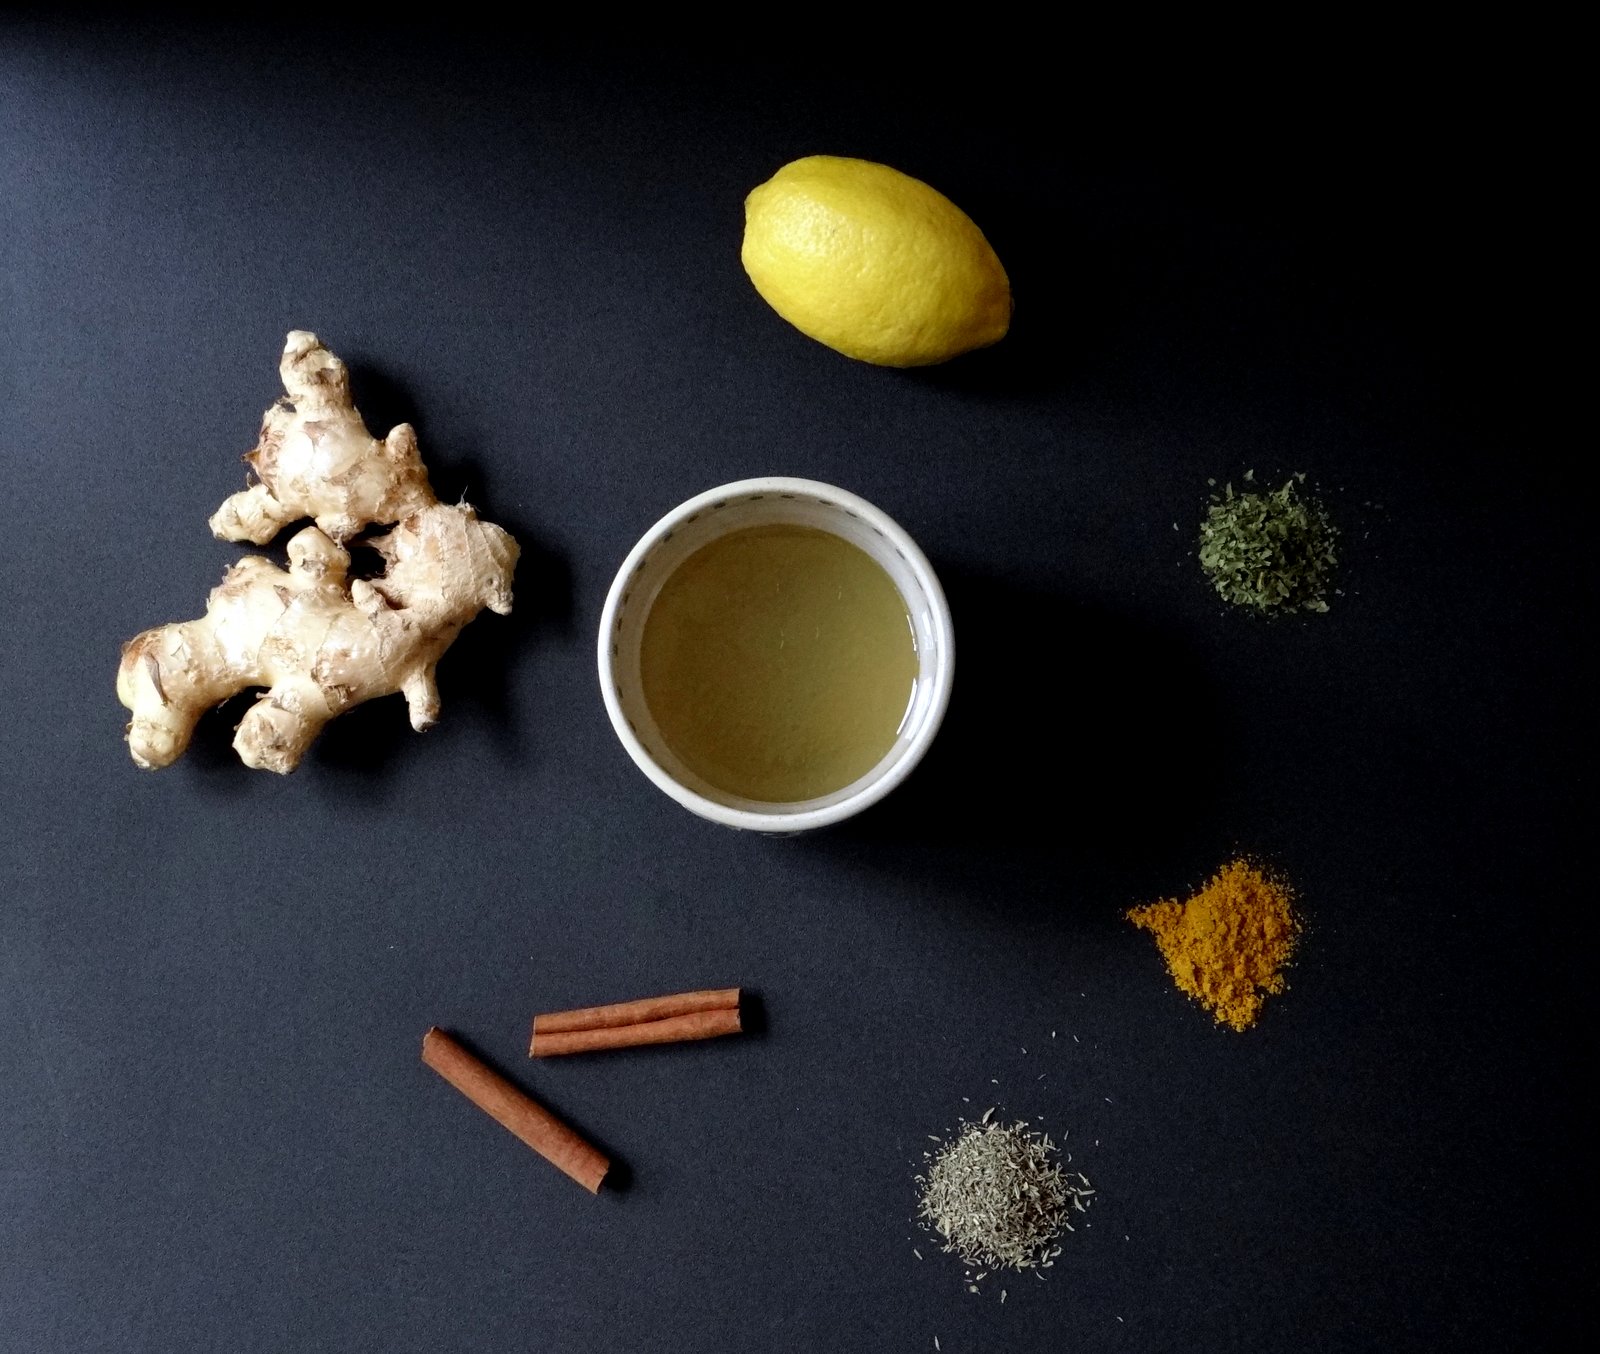 ingredients on black background: cup of broth, ginger, whole lemon, cinnamon sticks, and herbs